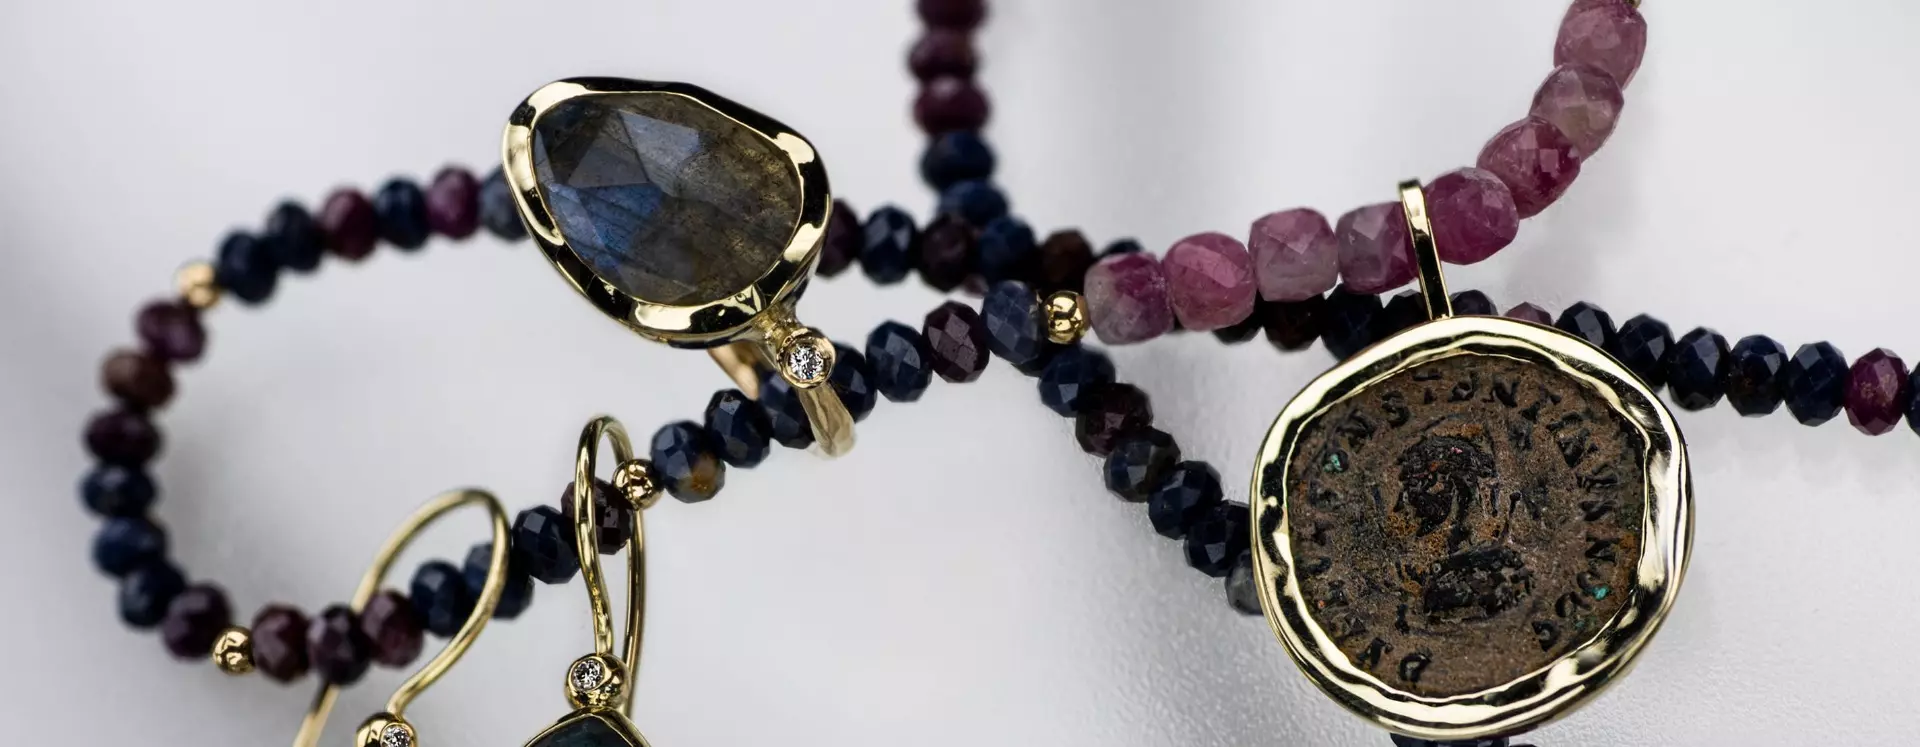 Ancient Rome Collection | 9K Gold Jewelry with Tourmaline, Labradorite and Sapphires